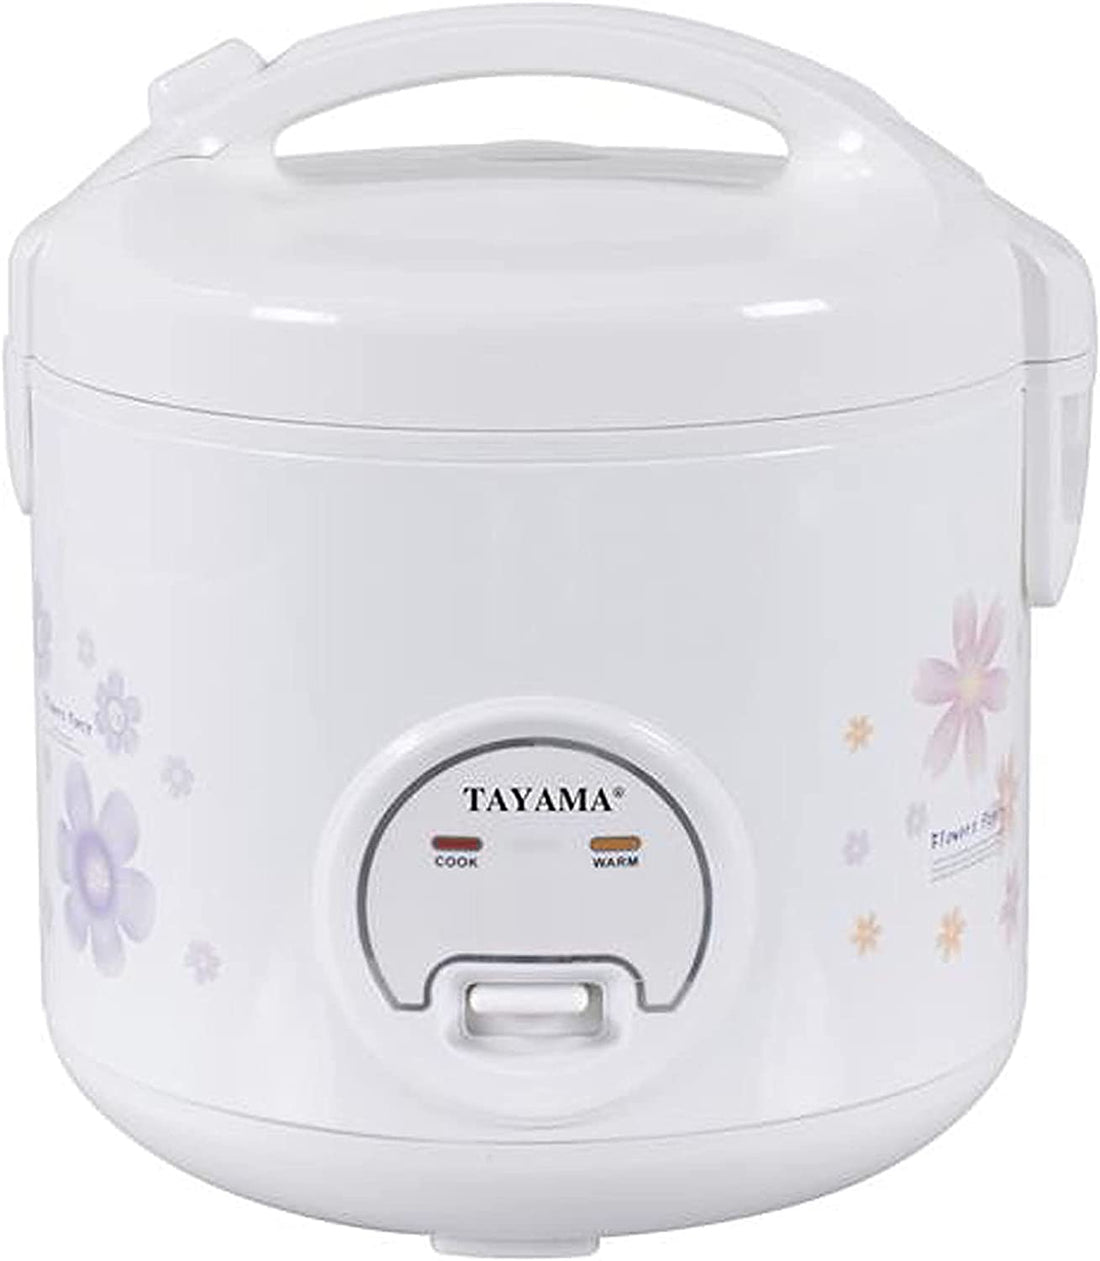 Tayama Automatic Rice Cooker &amp; Food Steamer, 10 Cups (Uncooked)